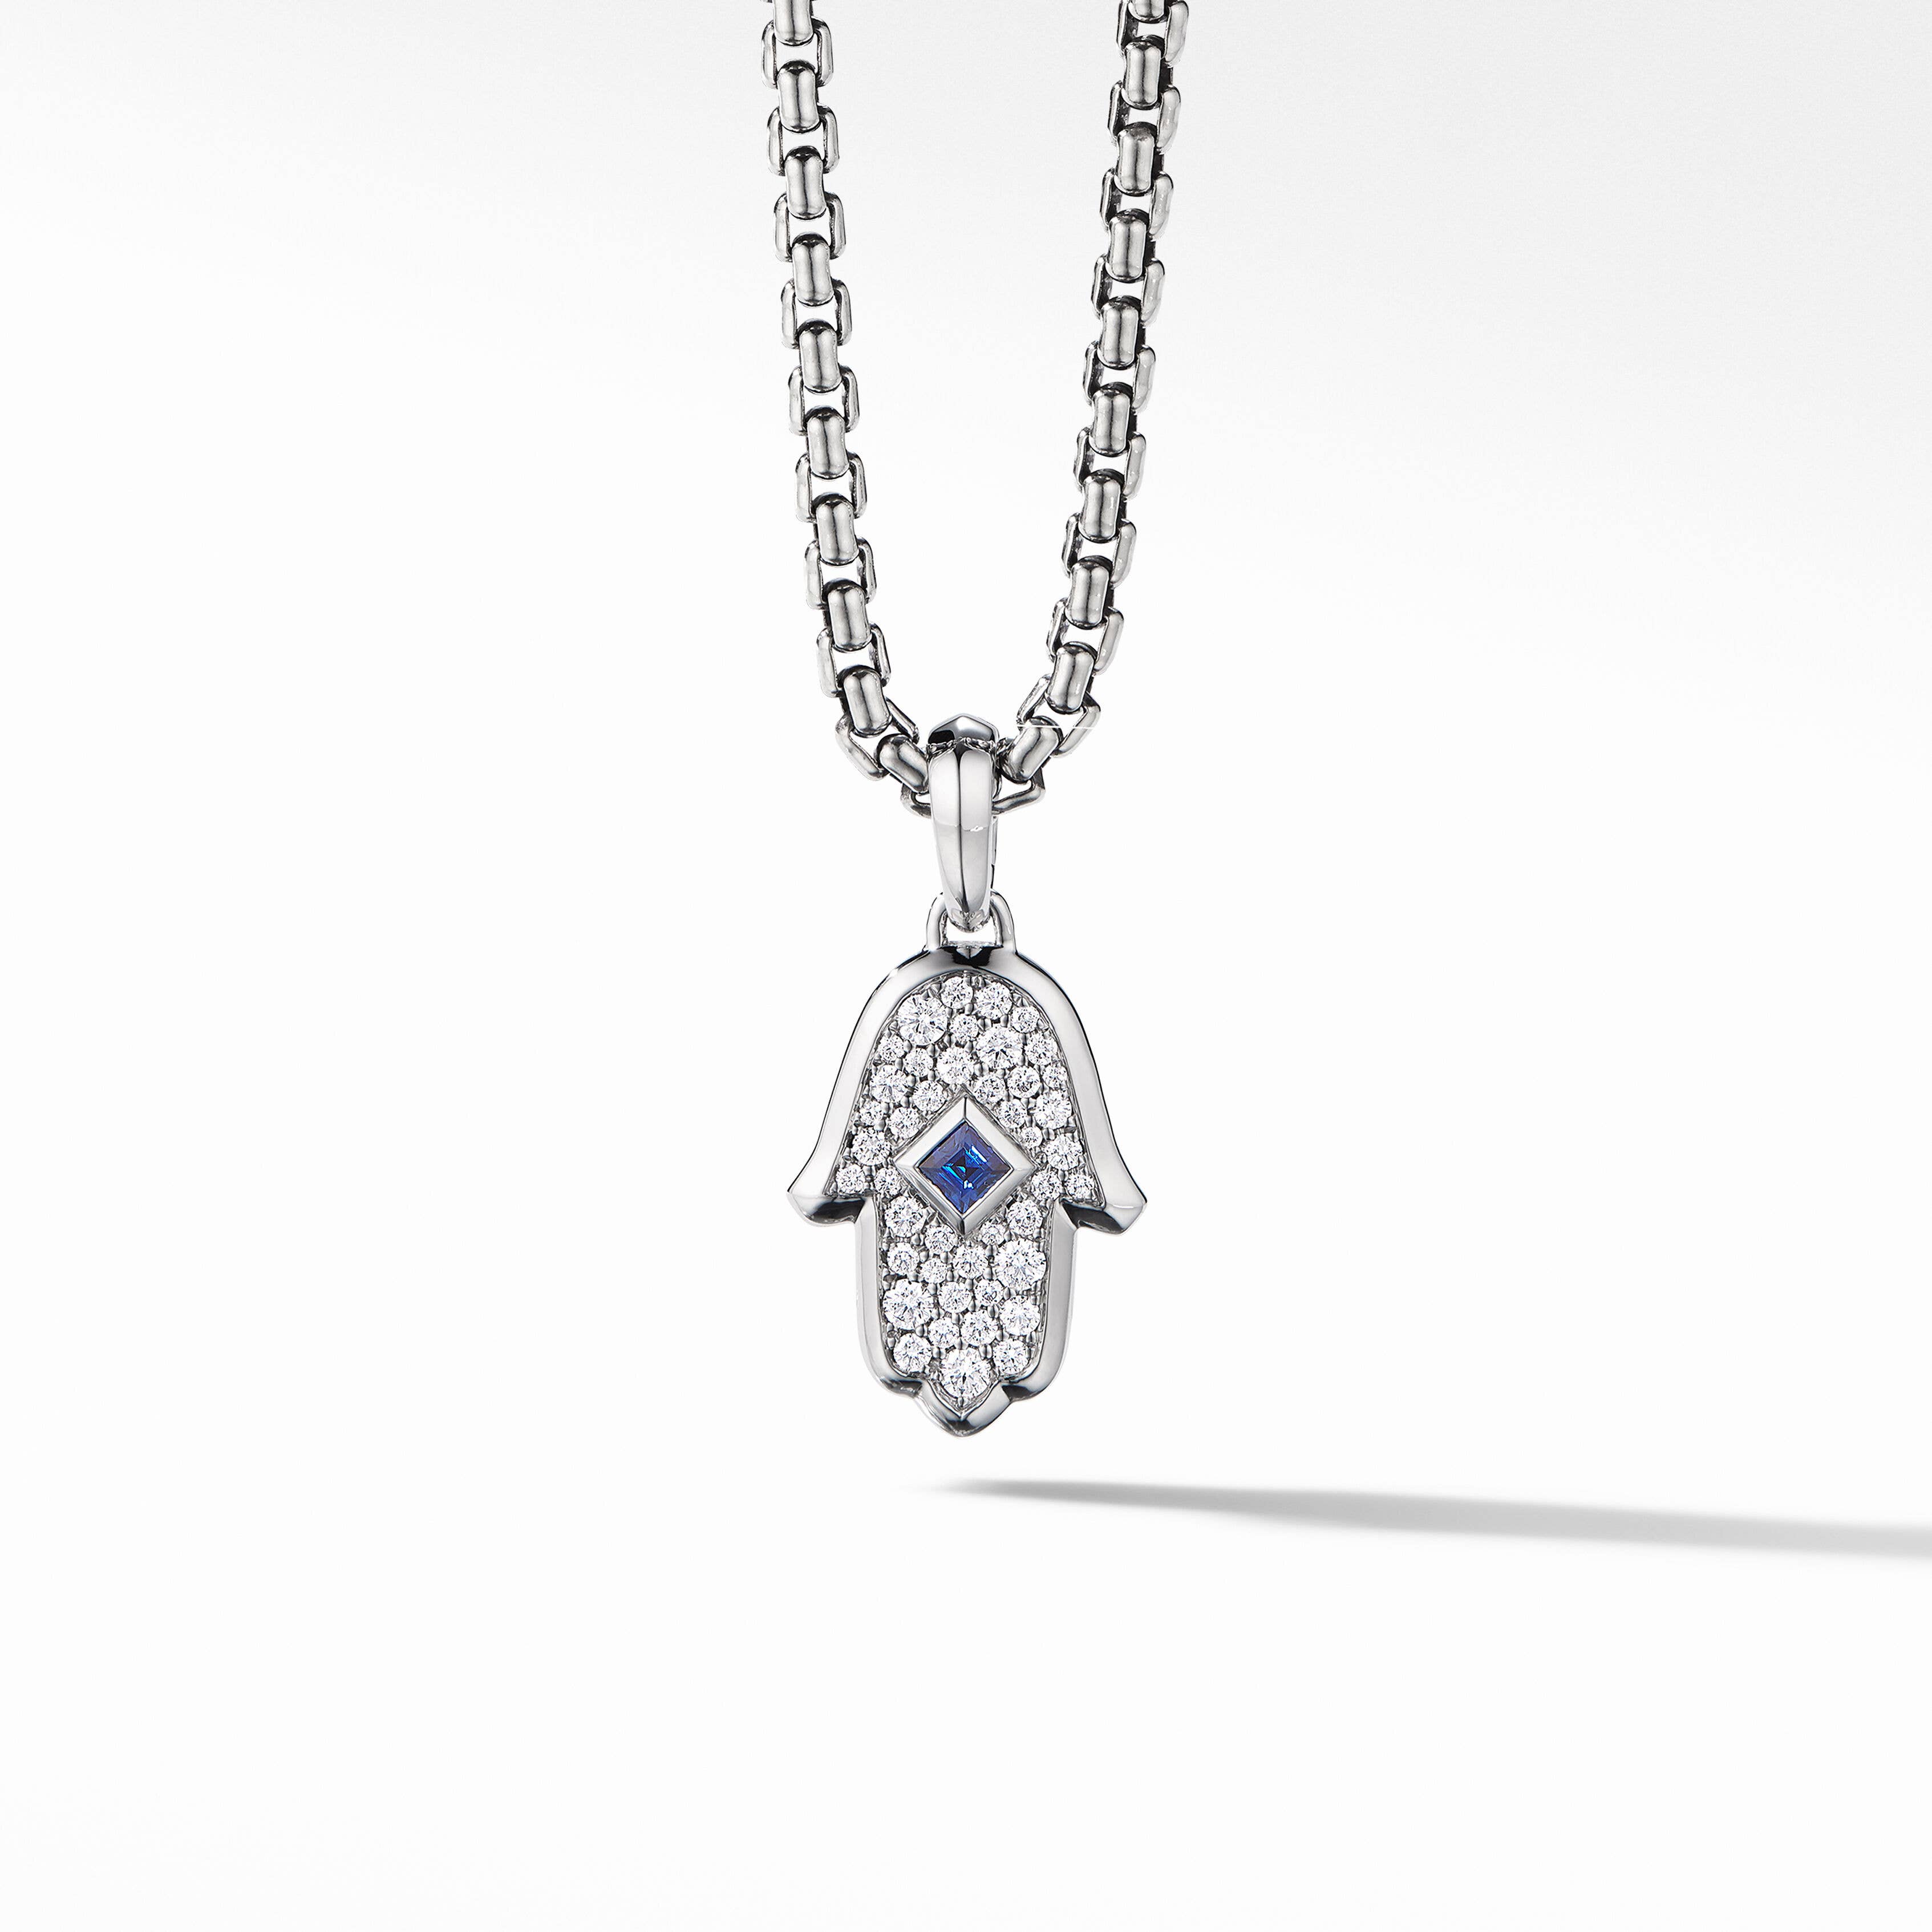 Hamsa Amulet in 18K White Gold with Pavé Diamonds and Blue Sapphire